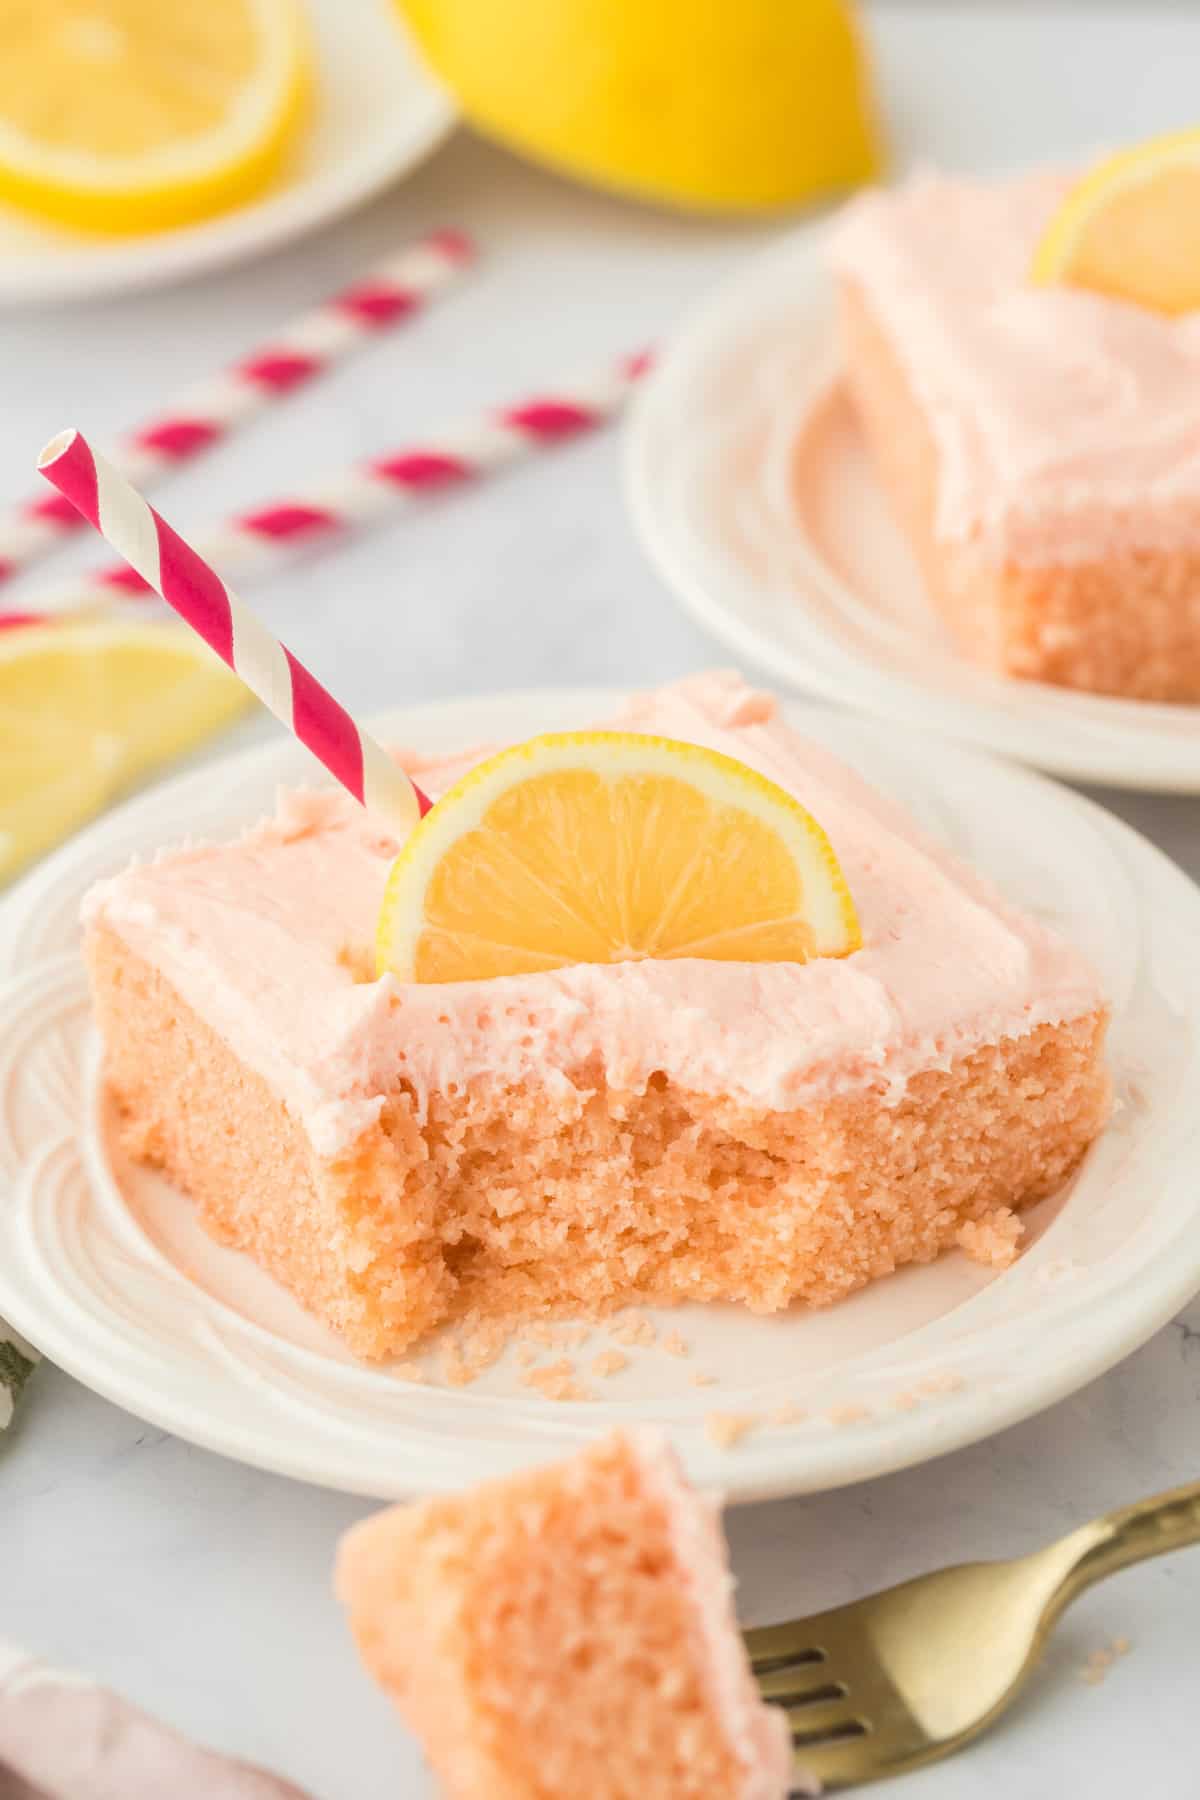 a square slice of pink lemonade cake topped with a lemon.